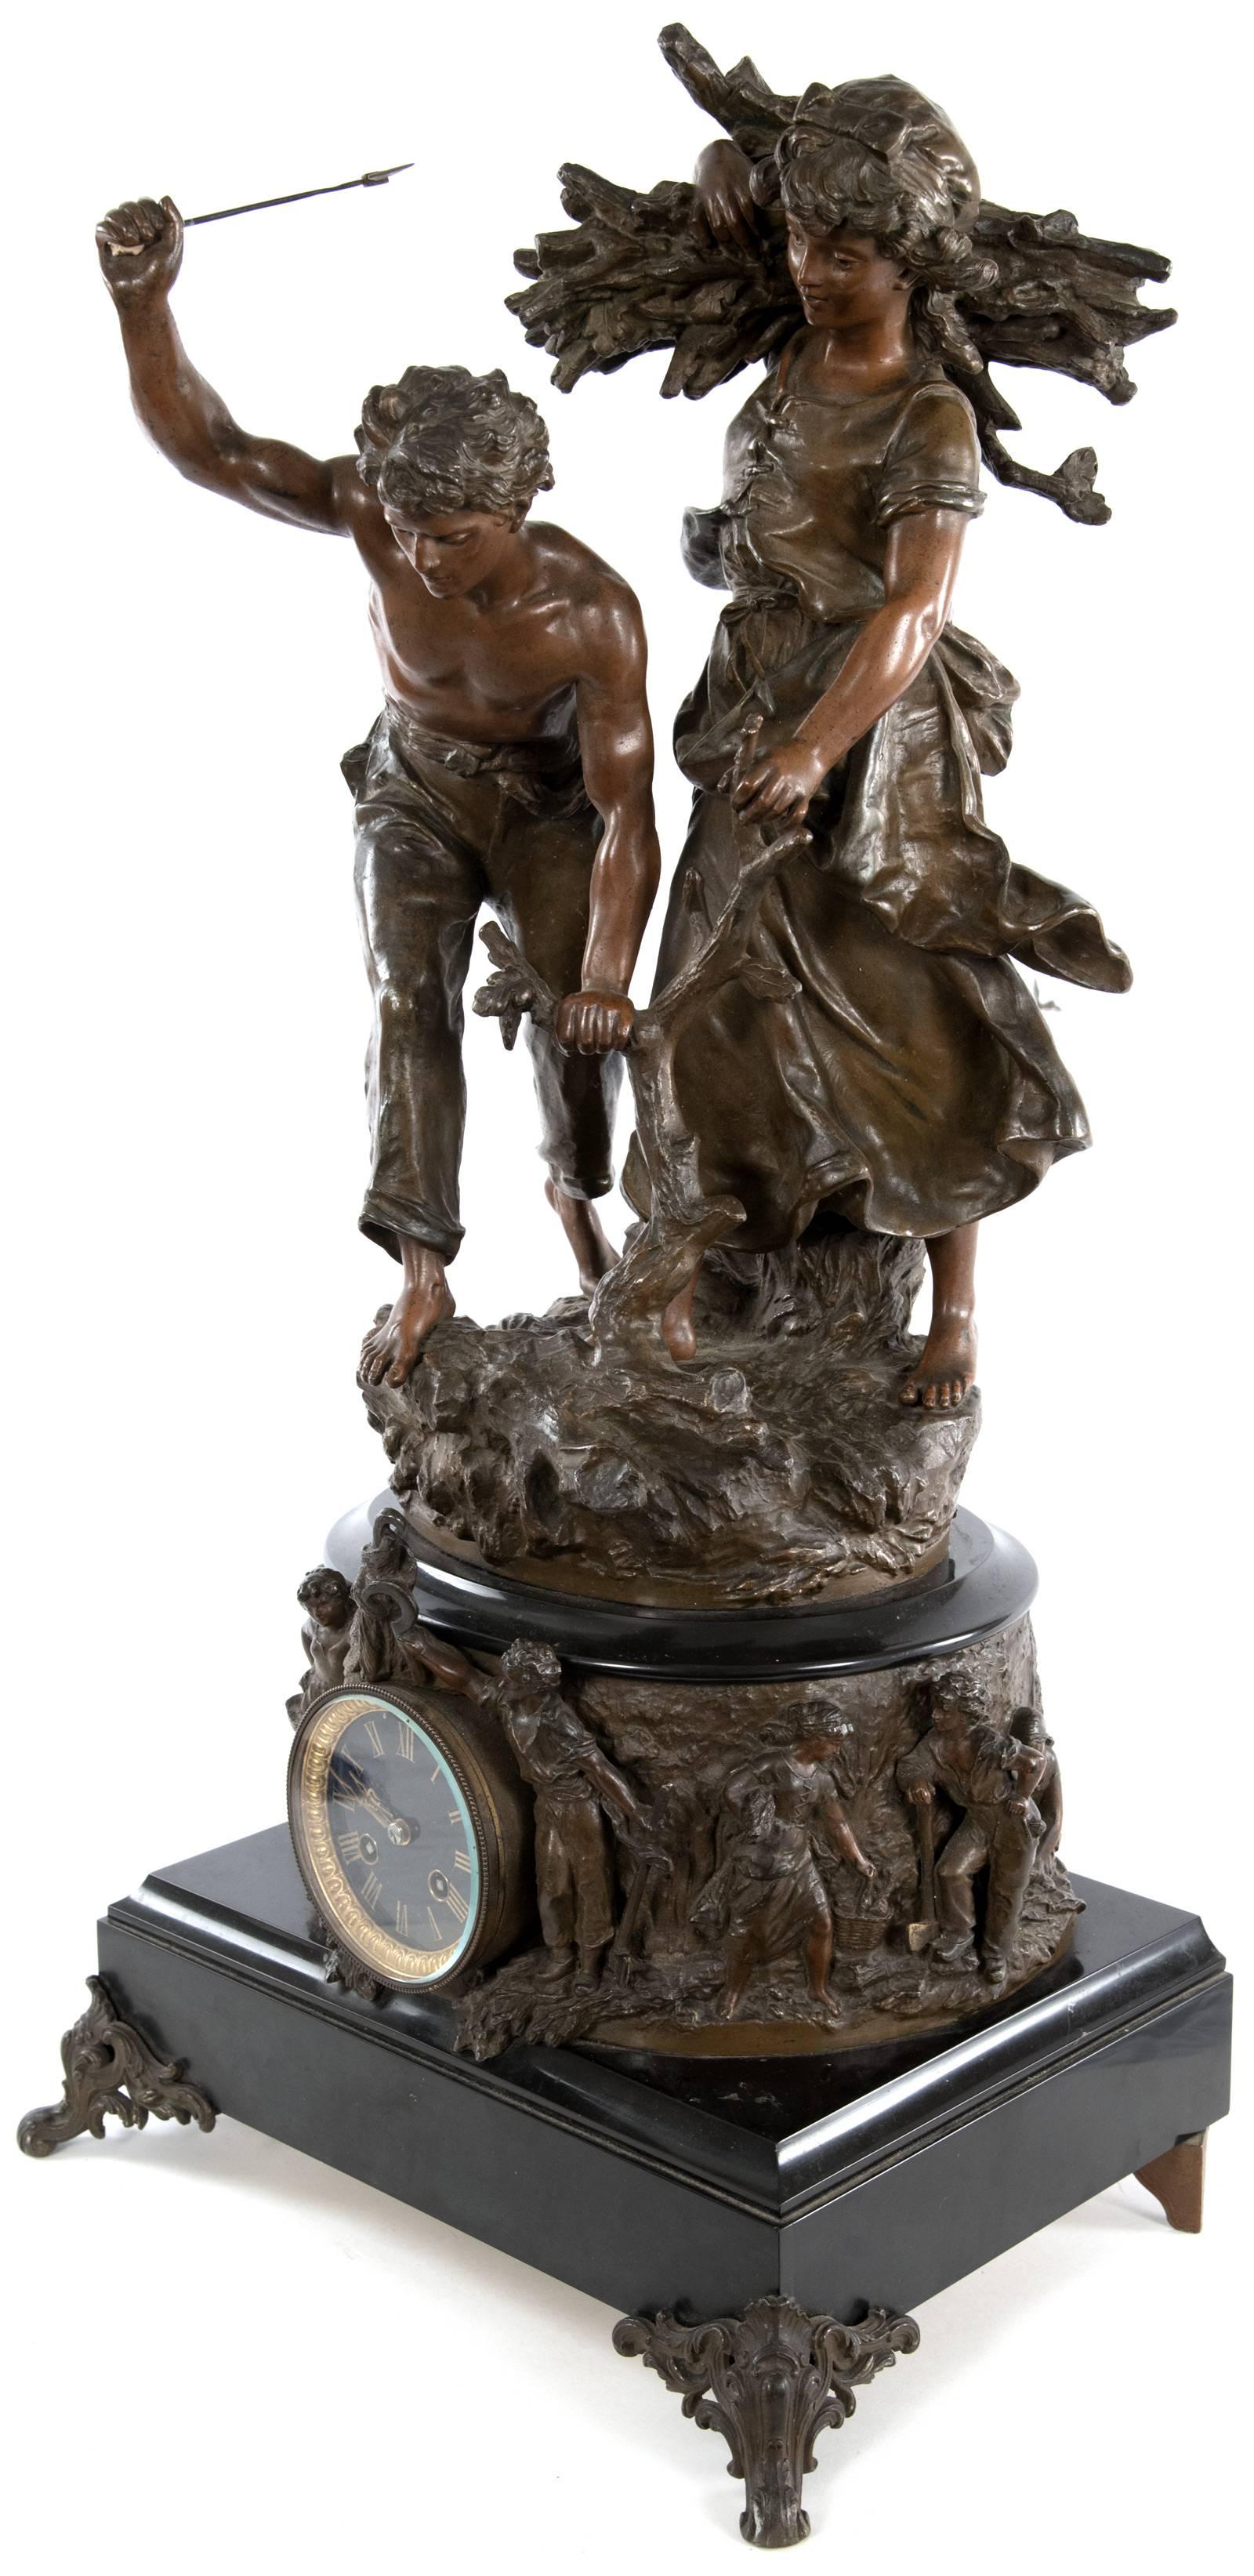 The figures of a young male and female peasant woodcutters, sculpted with exceptional detail and a wonderful sense of movement, are placed upon a naturalistic base on top of the round body of this mantel clock. A round, hand-painted enameled clock